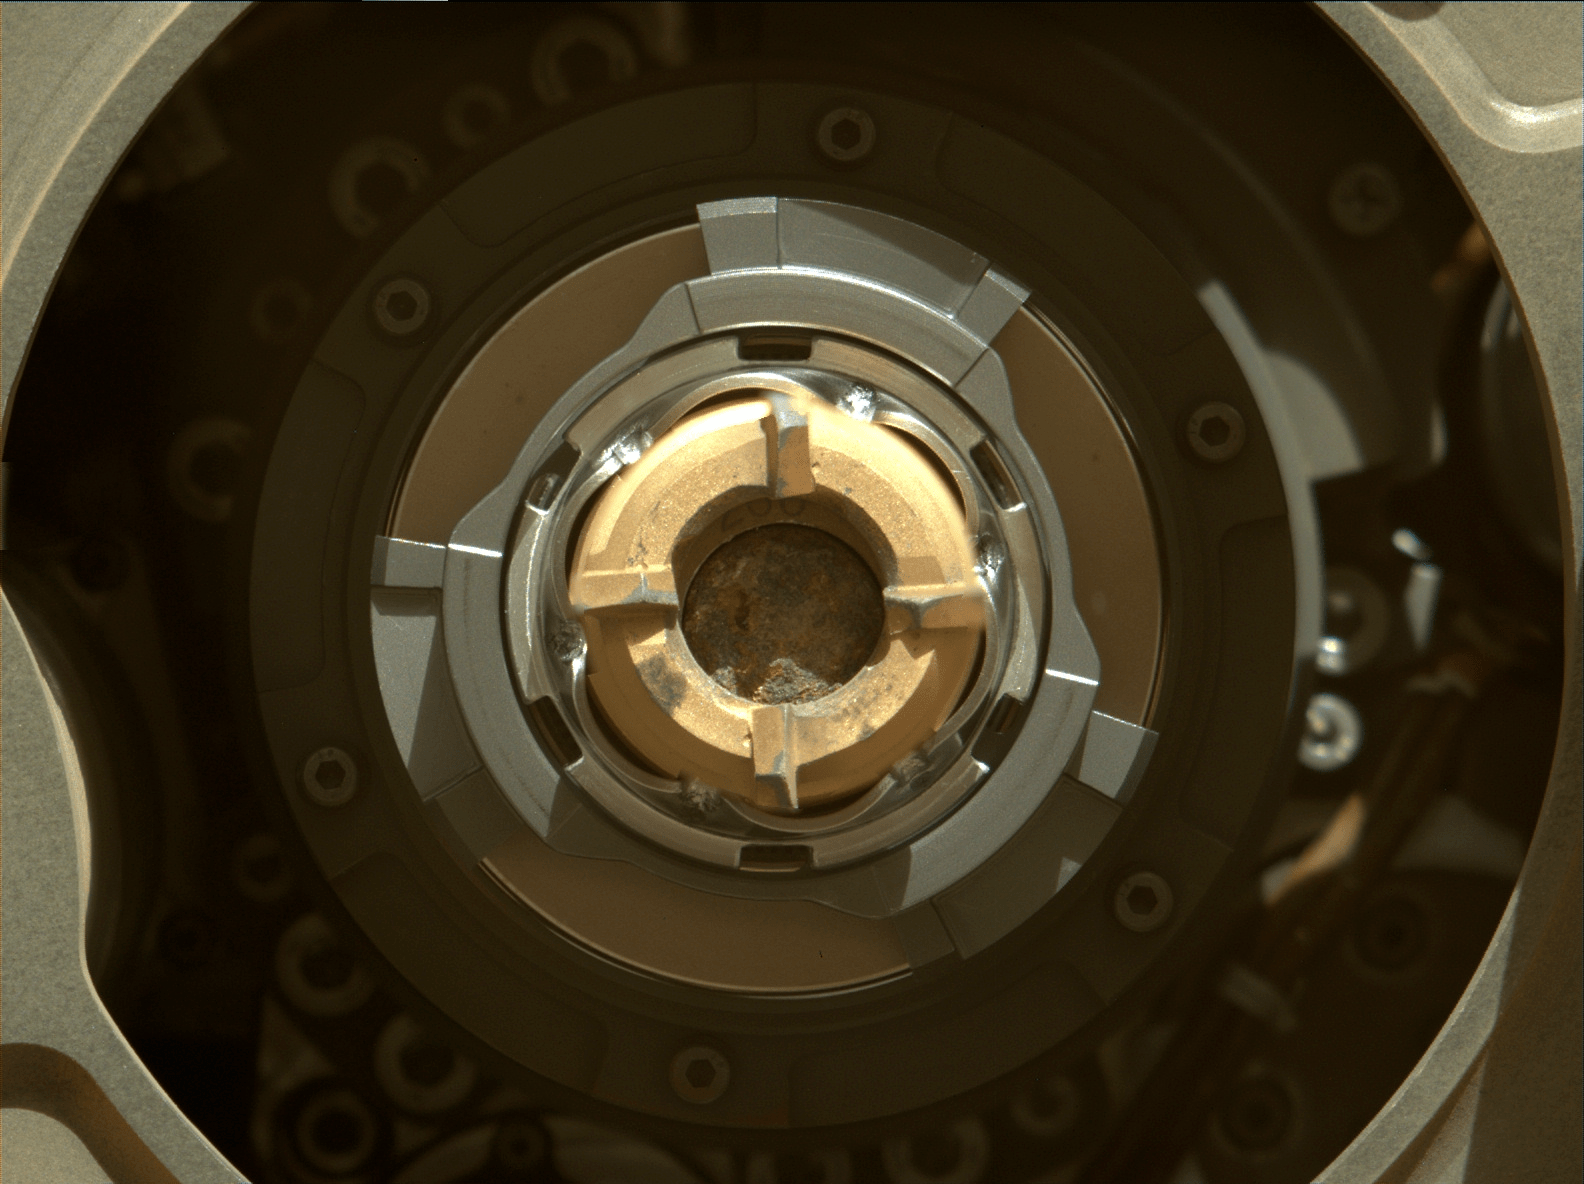 This Mastcam-Z image shows a sample of Mars rock inside the sample tube